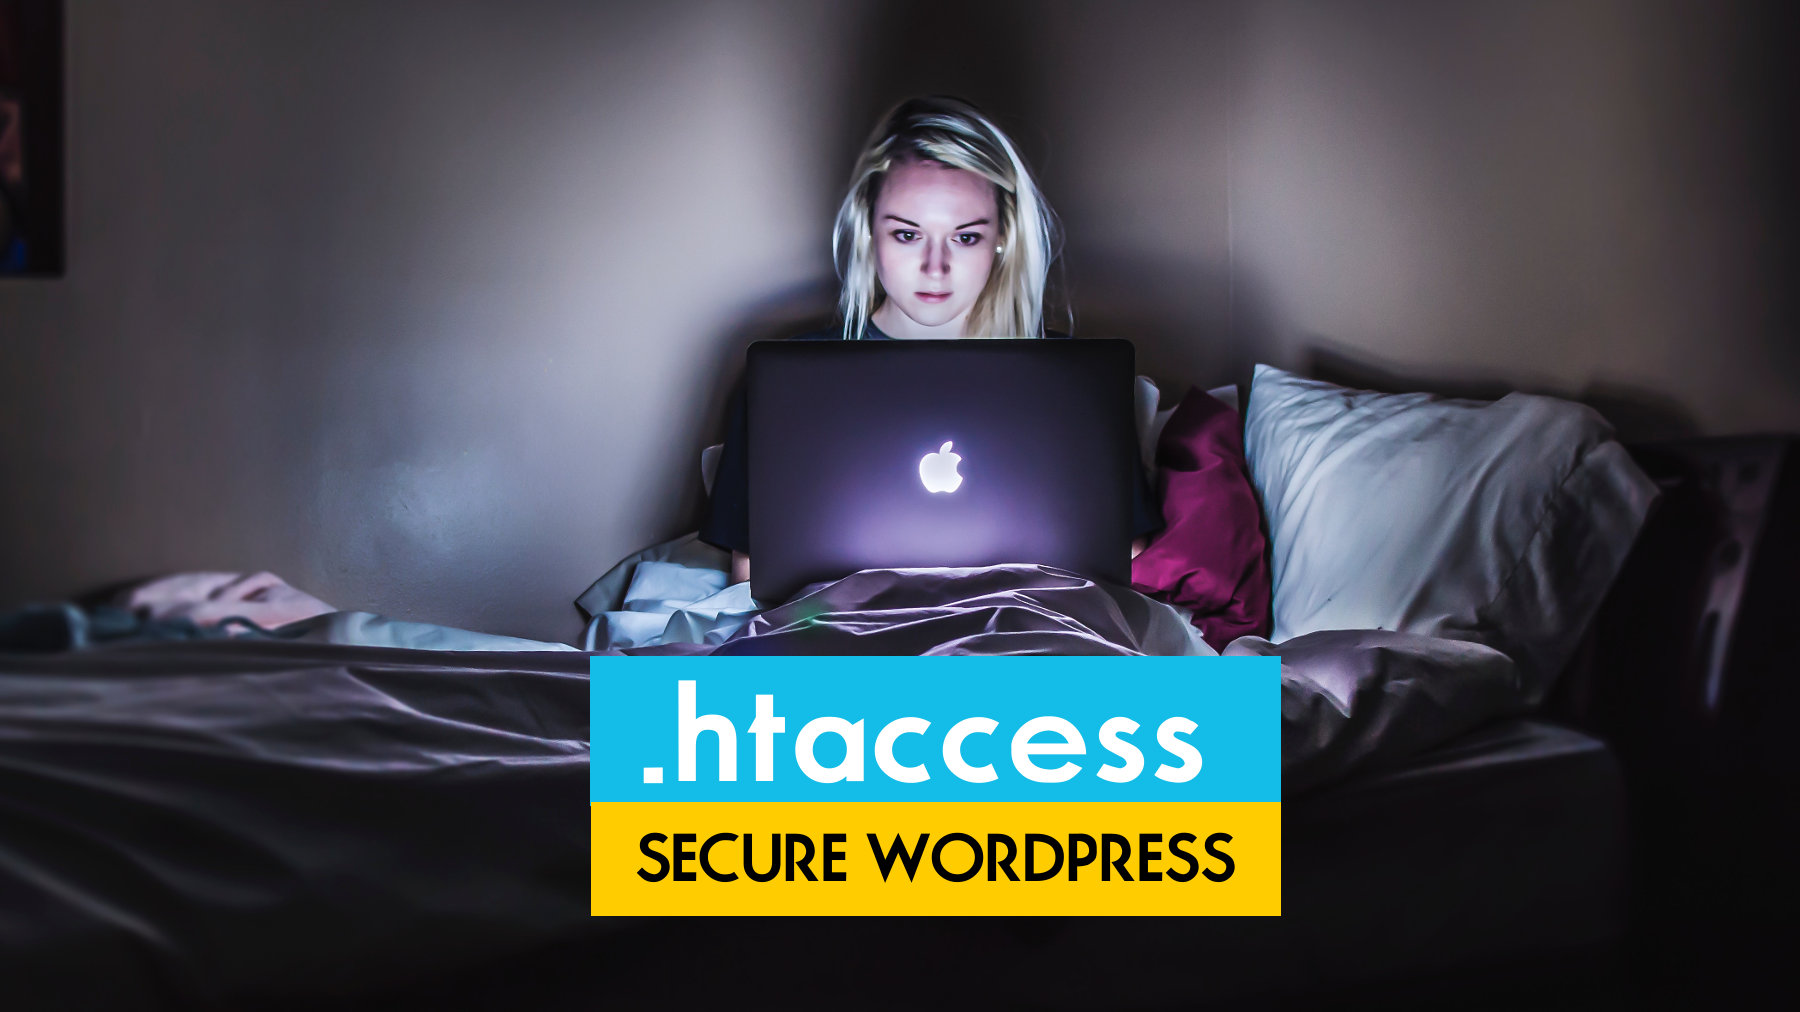 How to Secure Your WordPress Website from Hackers via .htaccess?